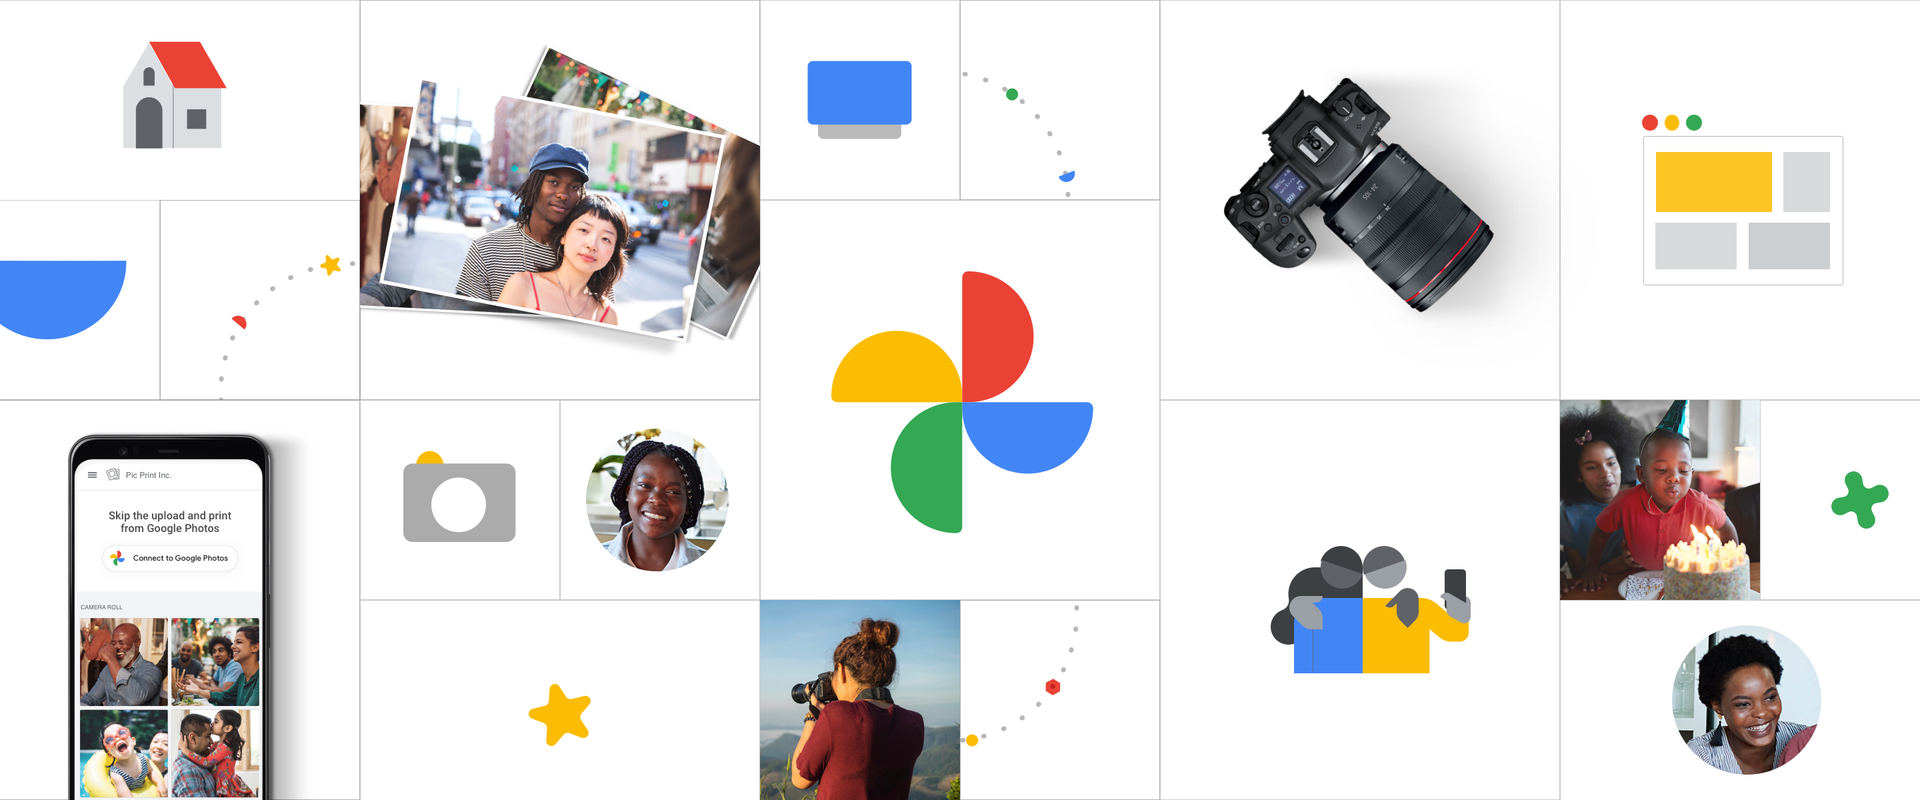 Google Photos not working on iPhone